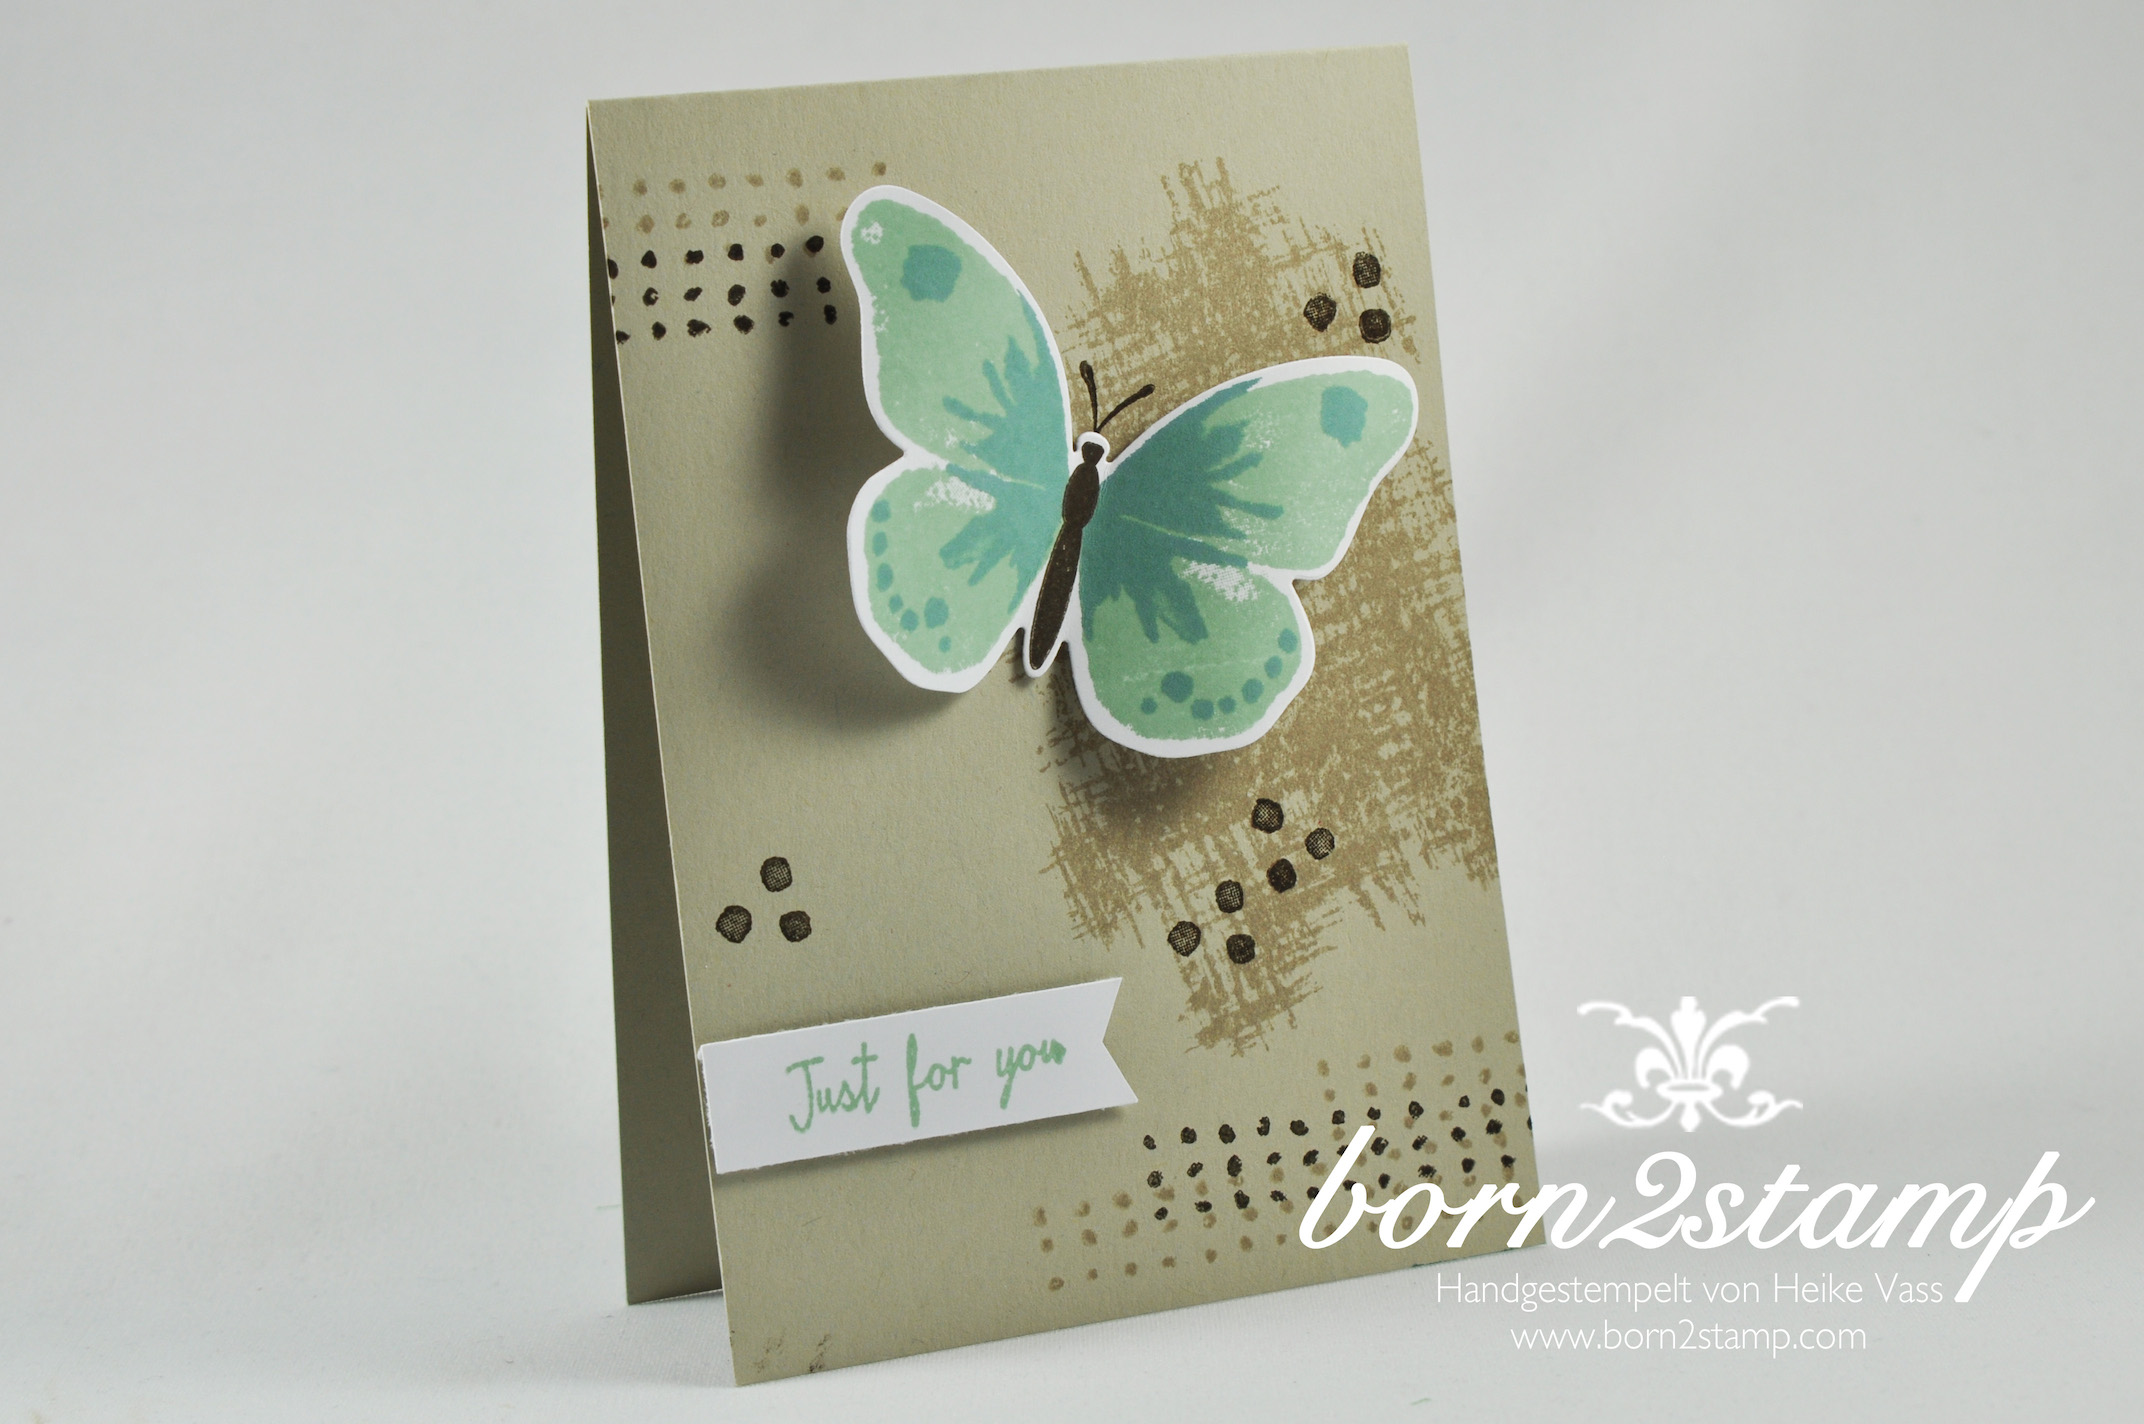 STAMPIN‘ UP! born2stamp Karte Watercolor Wings – Alles wird gut – Faehnchenstanze – Bold Butterfly Framelits